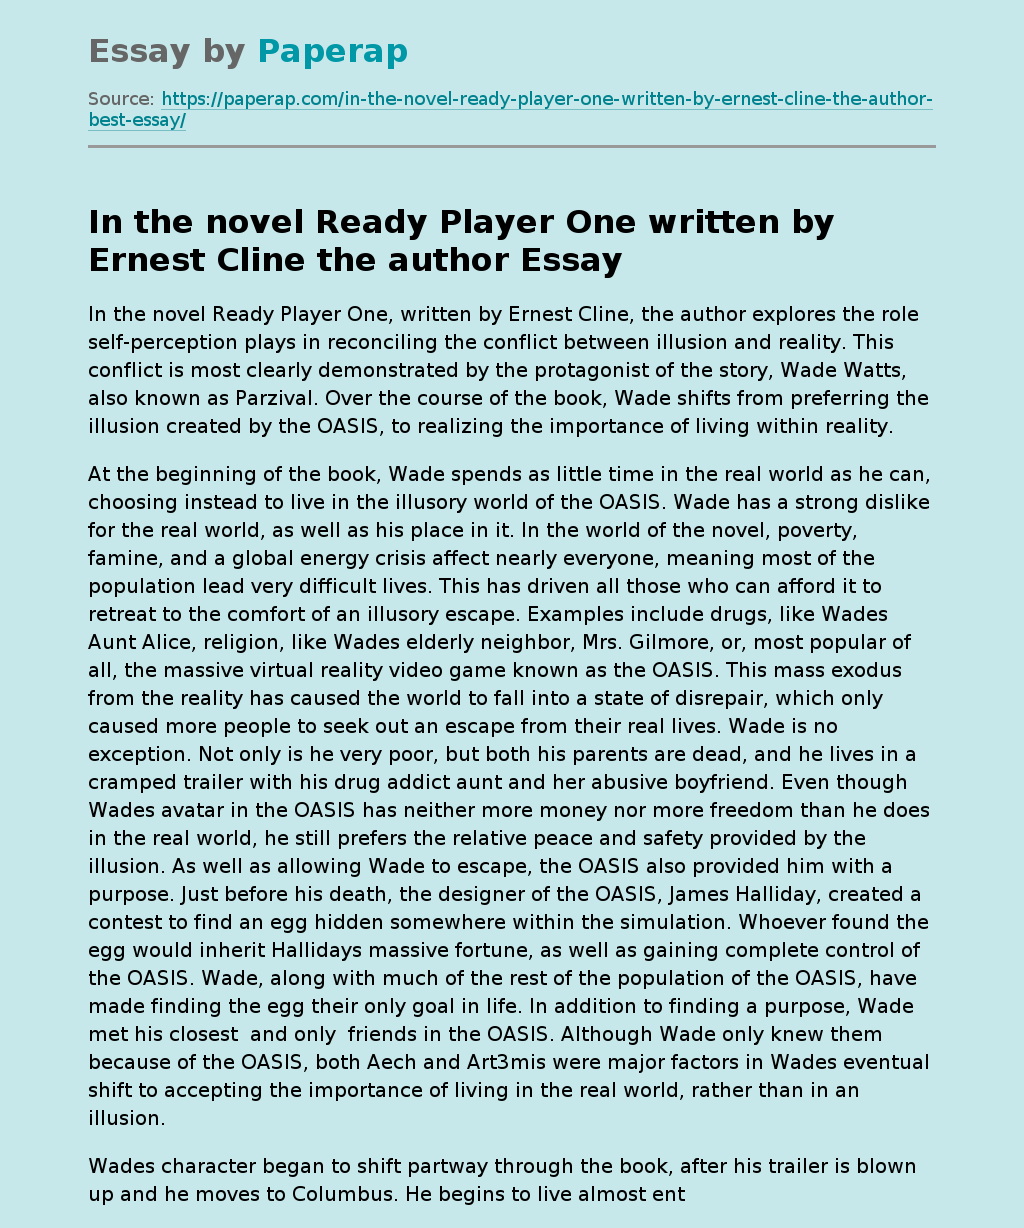 In the novel Ready Player One written by Ernest Cline the author